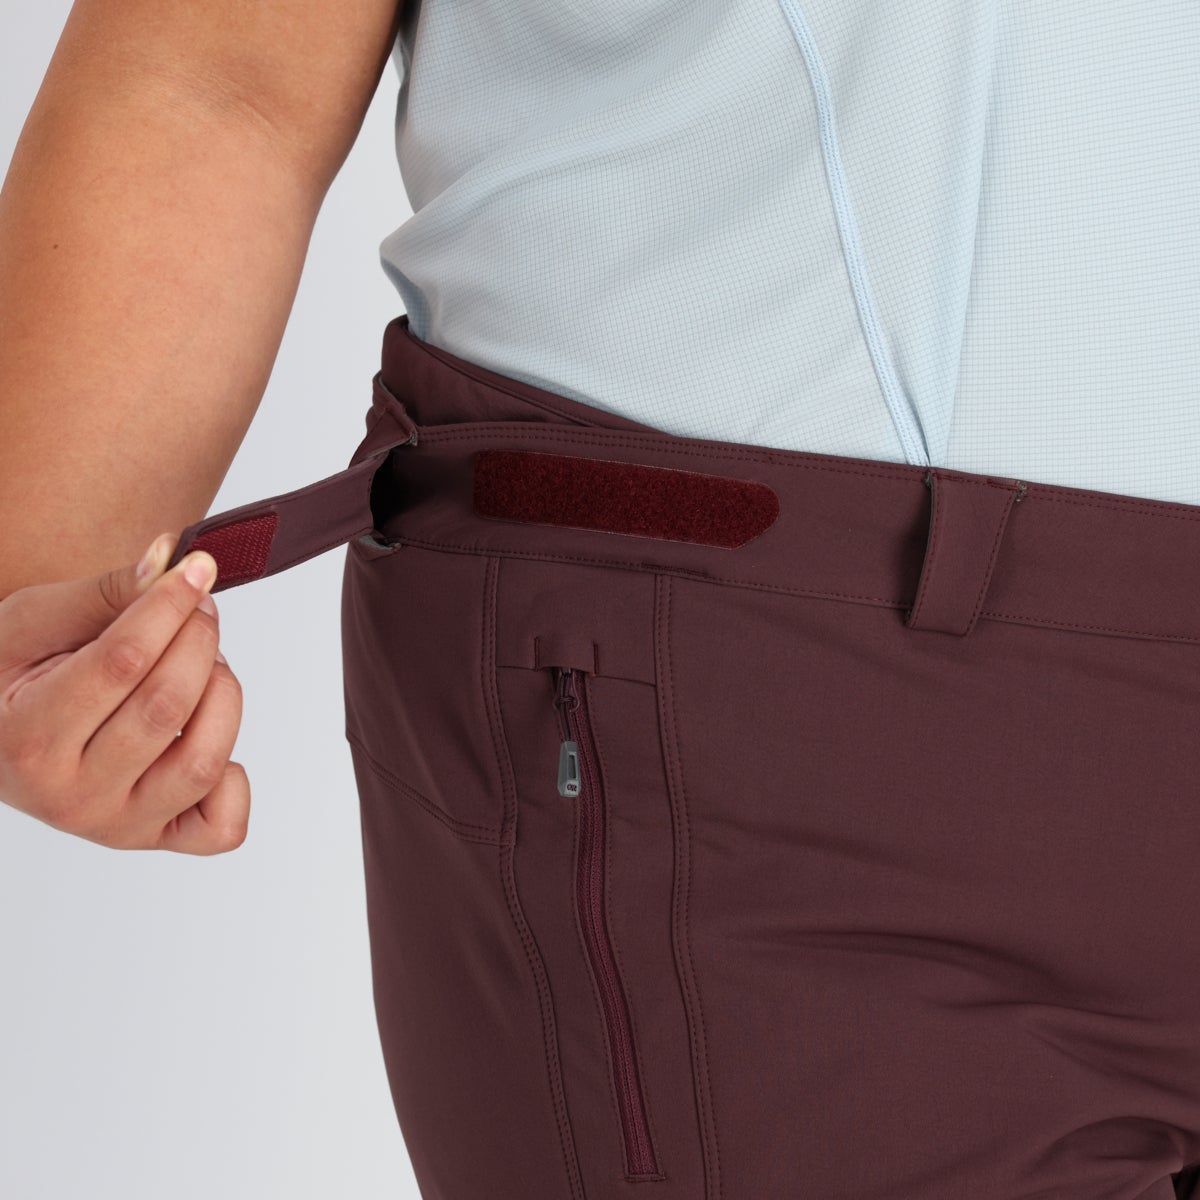 00 :: Adjustable Waistband / Easily adjustable waistband can be worn tight to seal out weather, or loosened up to accommodate multiple layers.